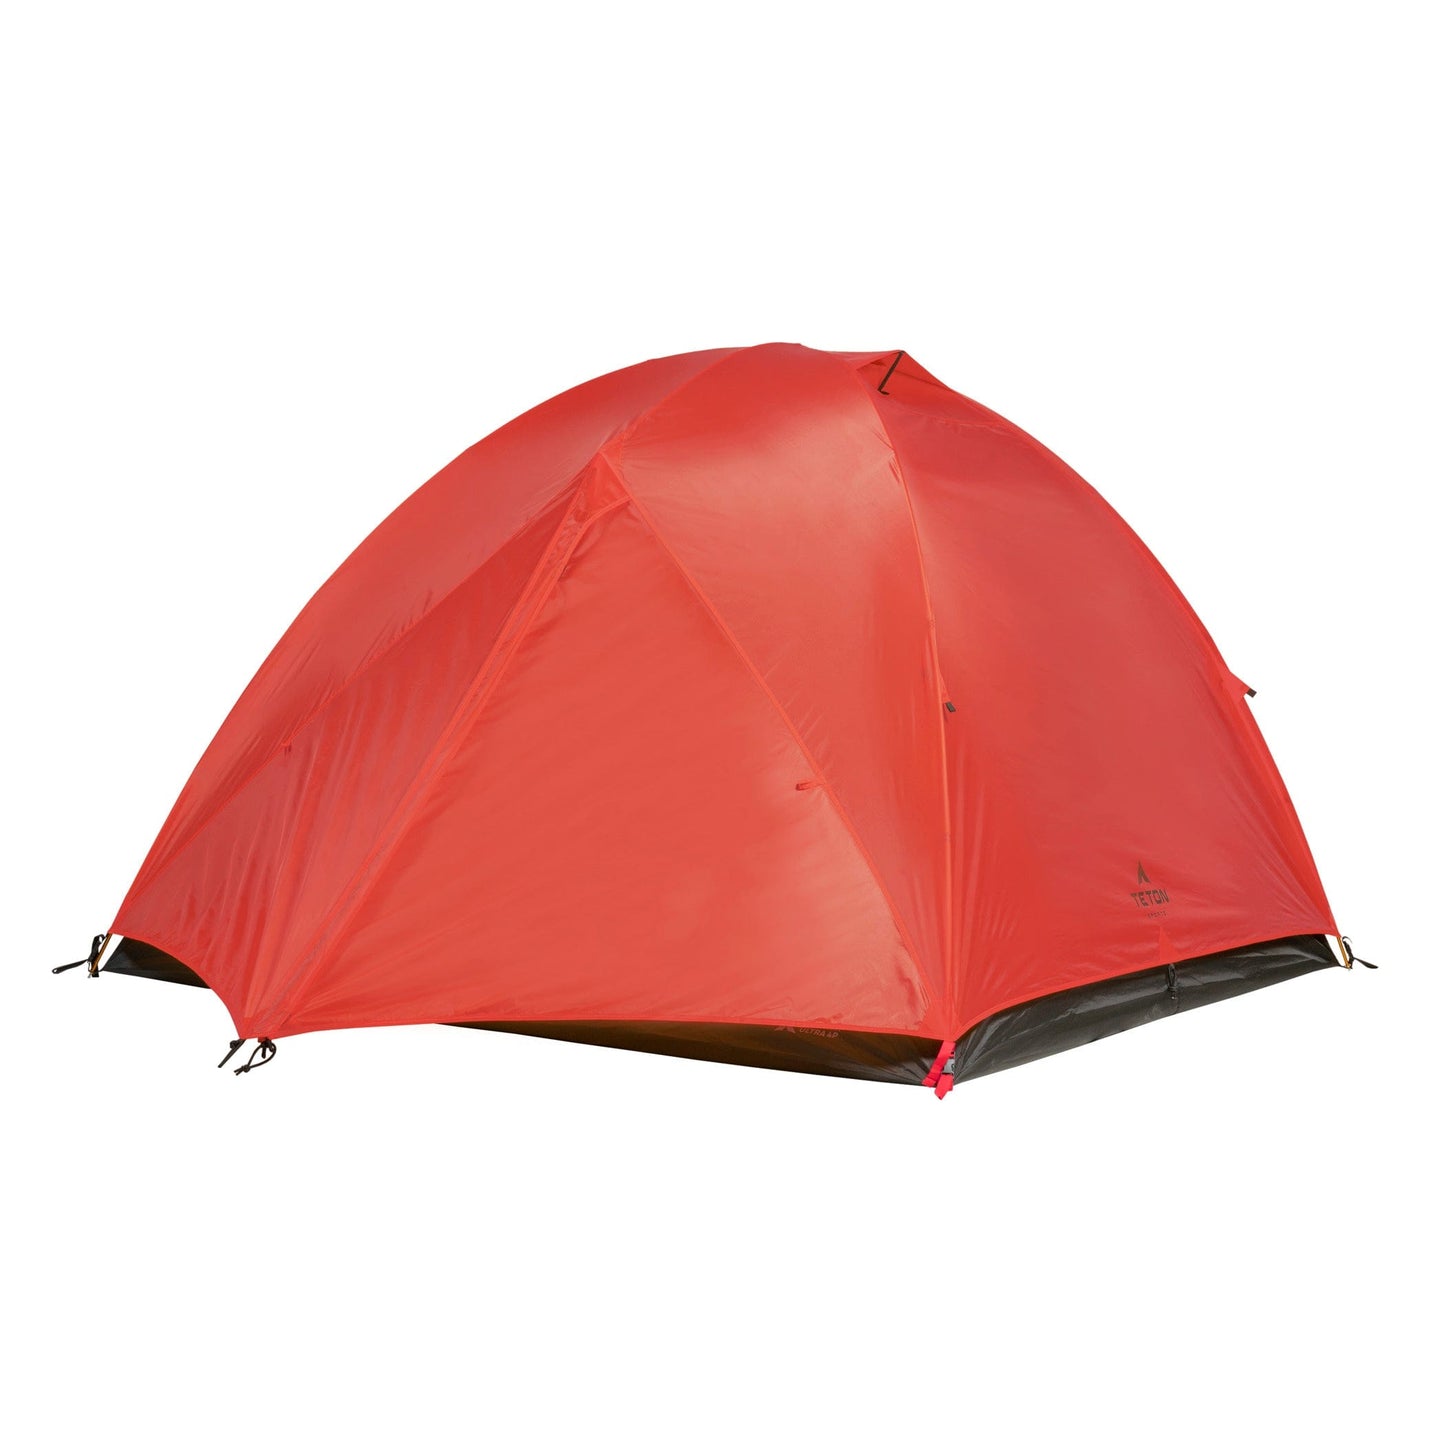 Mountain Ultra 4-Person Tent